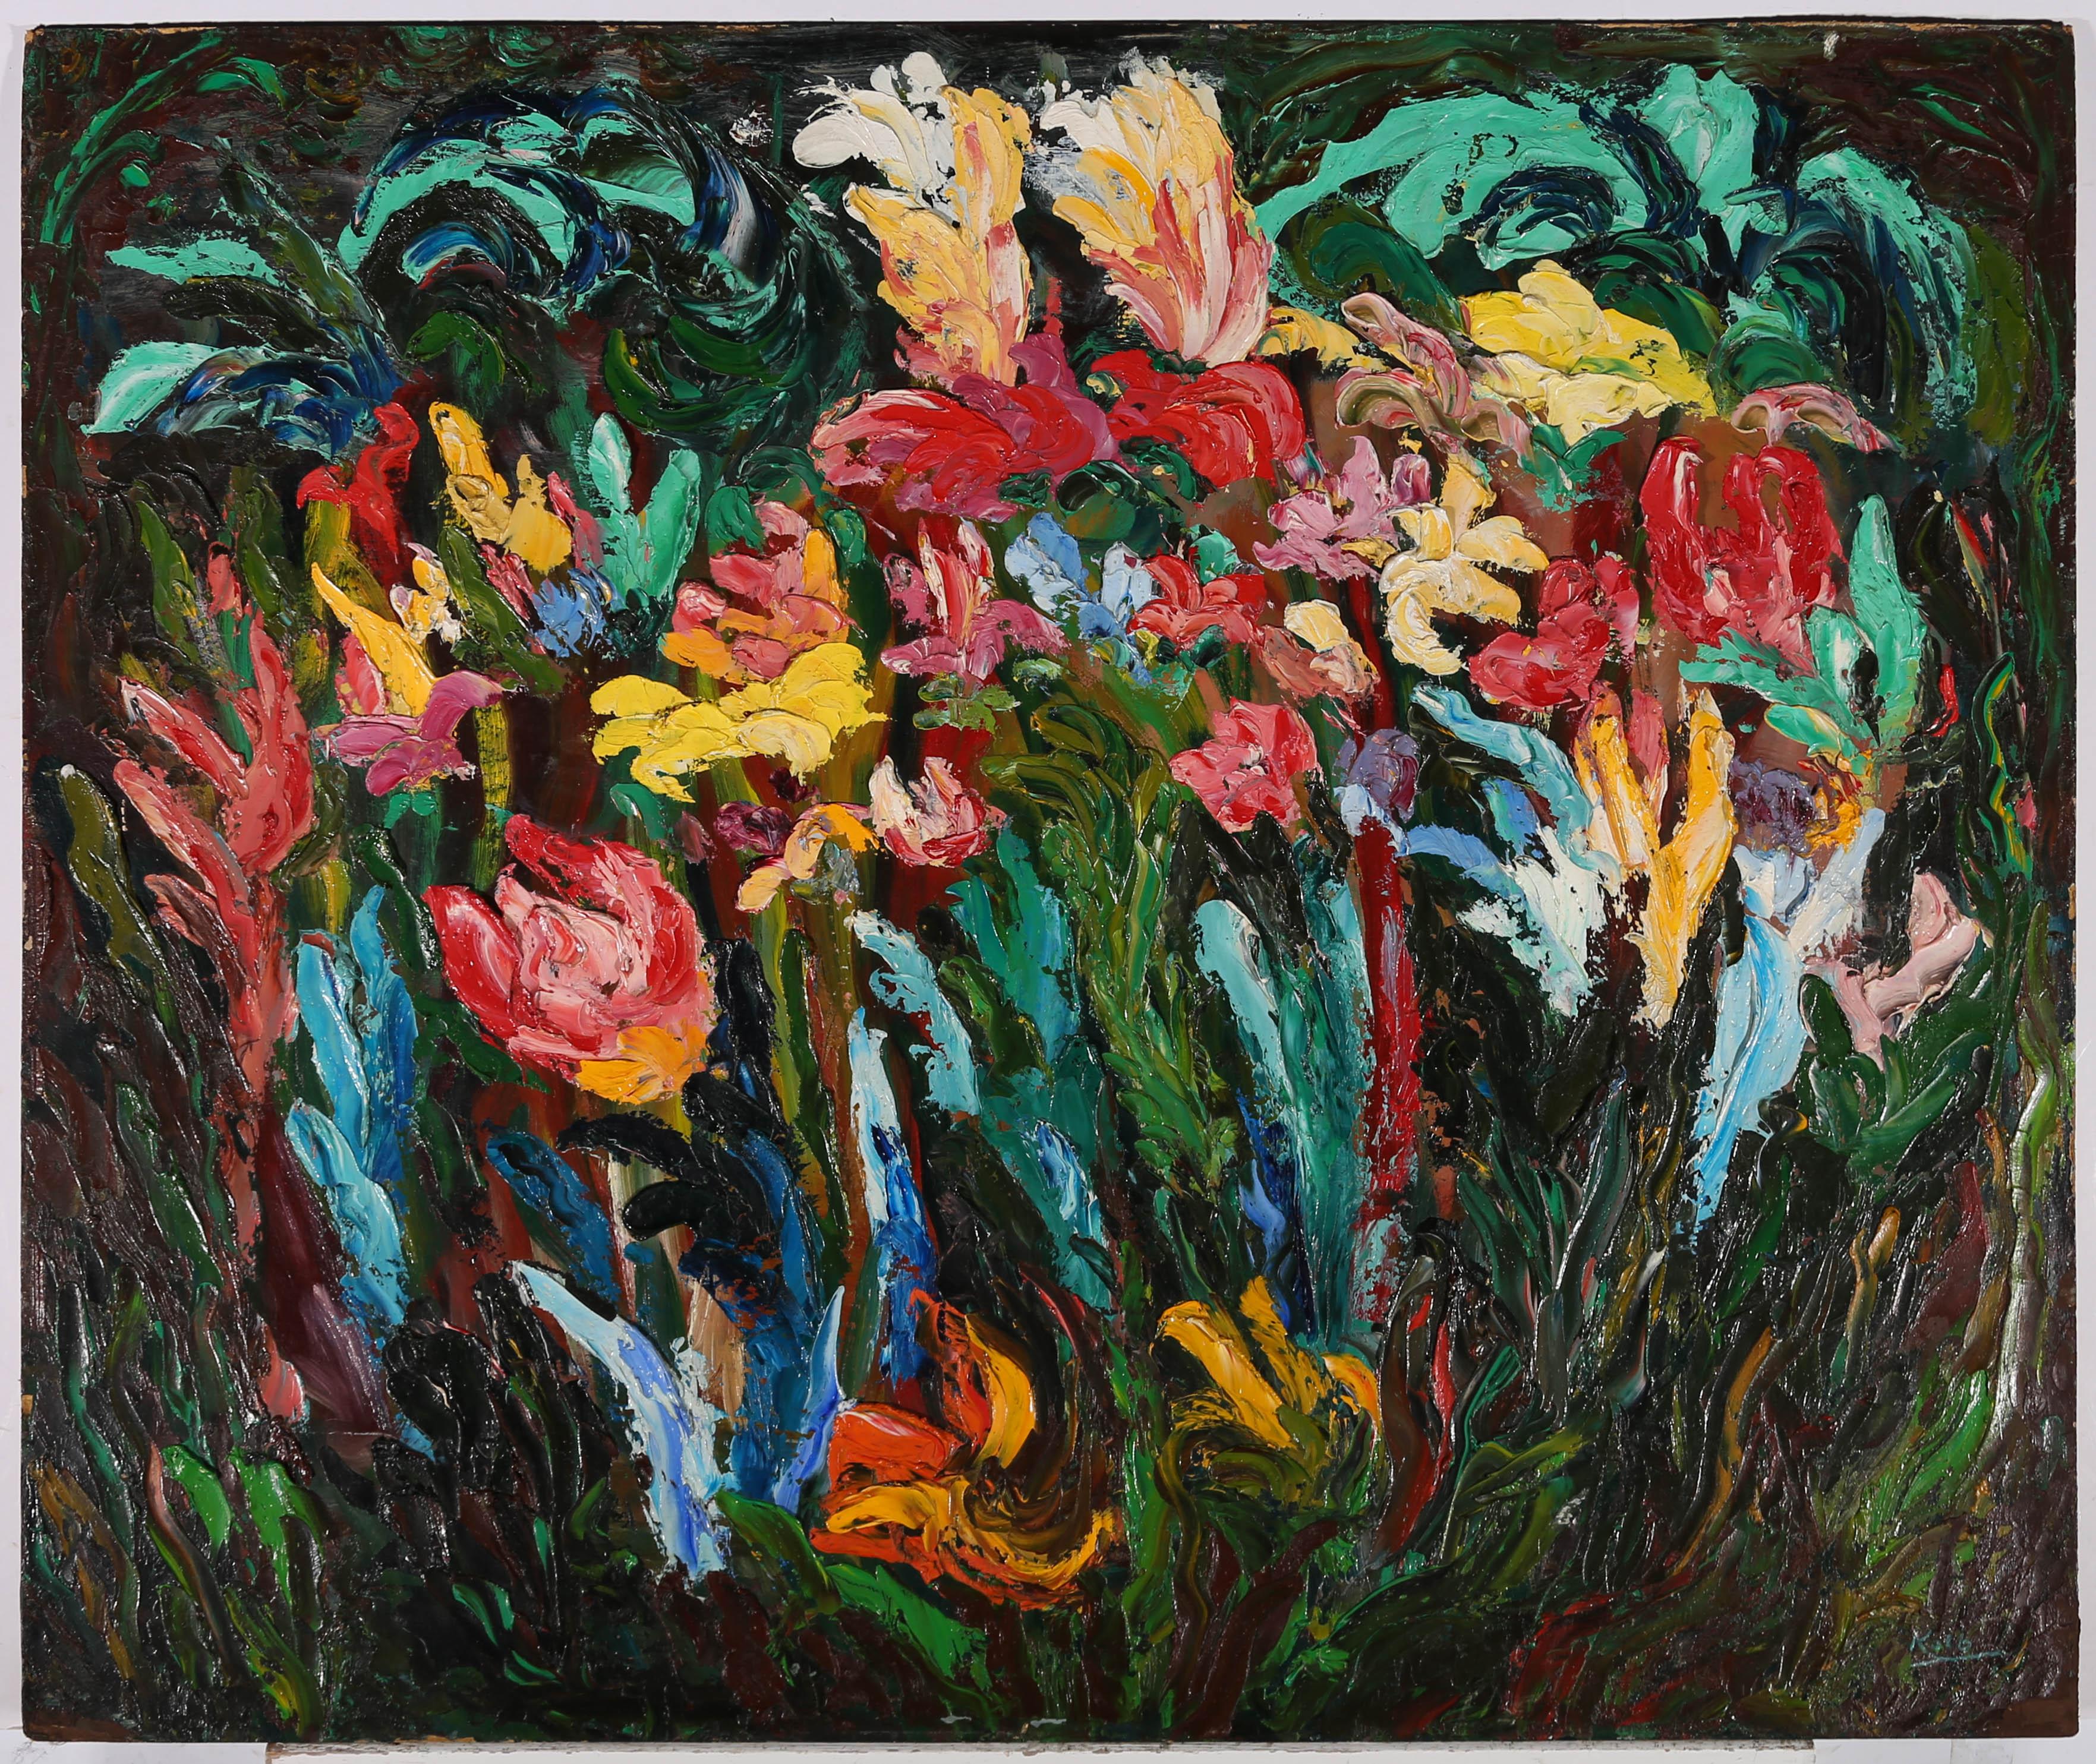 A wonderfully vibrant and dynamic 20th Century impasto oil painting showing a cacophony of colourful flowers full of movement and life. The artist's combination of vivid colour and heavy textured paint make the flowers jump off the board and add